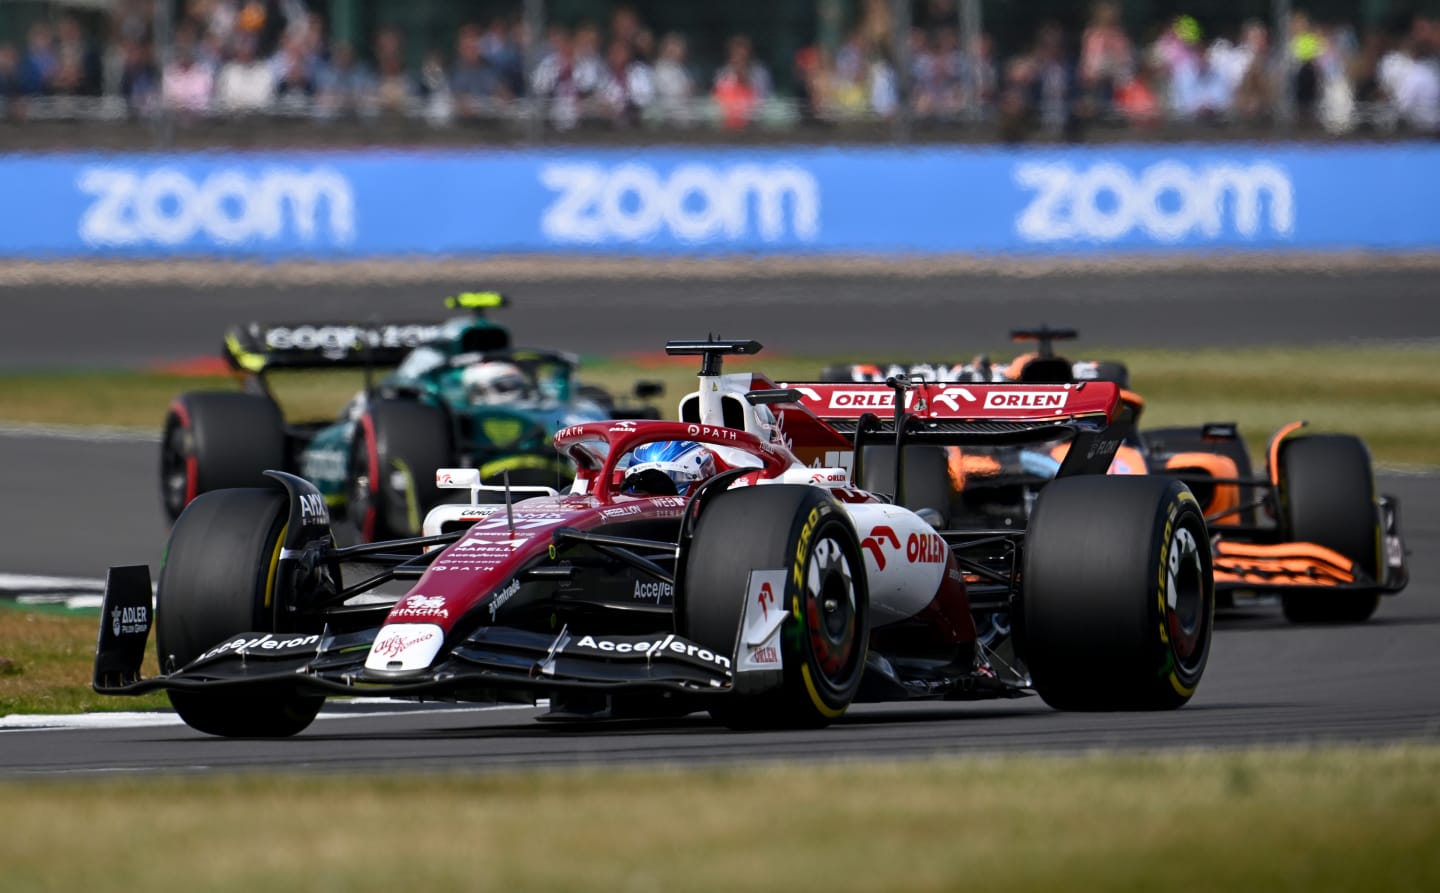 NORTHAMPTON, ENGLAND - JULY 03: Valtteri Bottas of Finland driving the (77) Alfa Romeo F1 C42 Ferrari on track during the F1 Grand Prix of Great Britain at Silverstone on July 03, 2022 in Northampton, England. (Photo by Clive Mason/Getty Images)